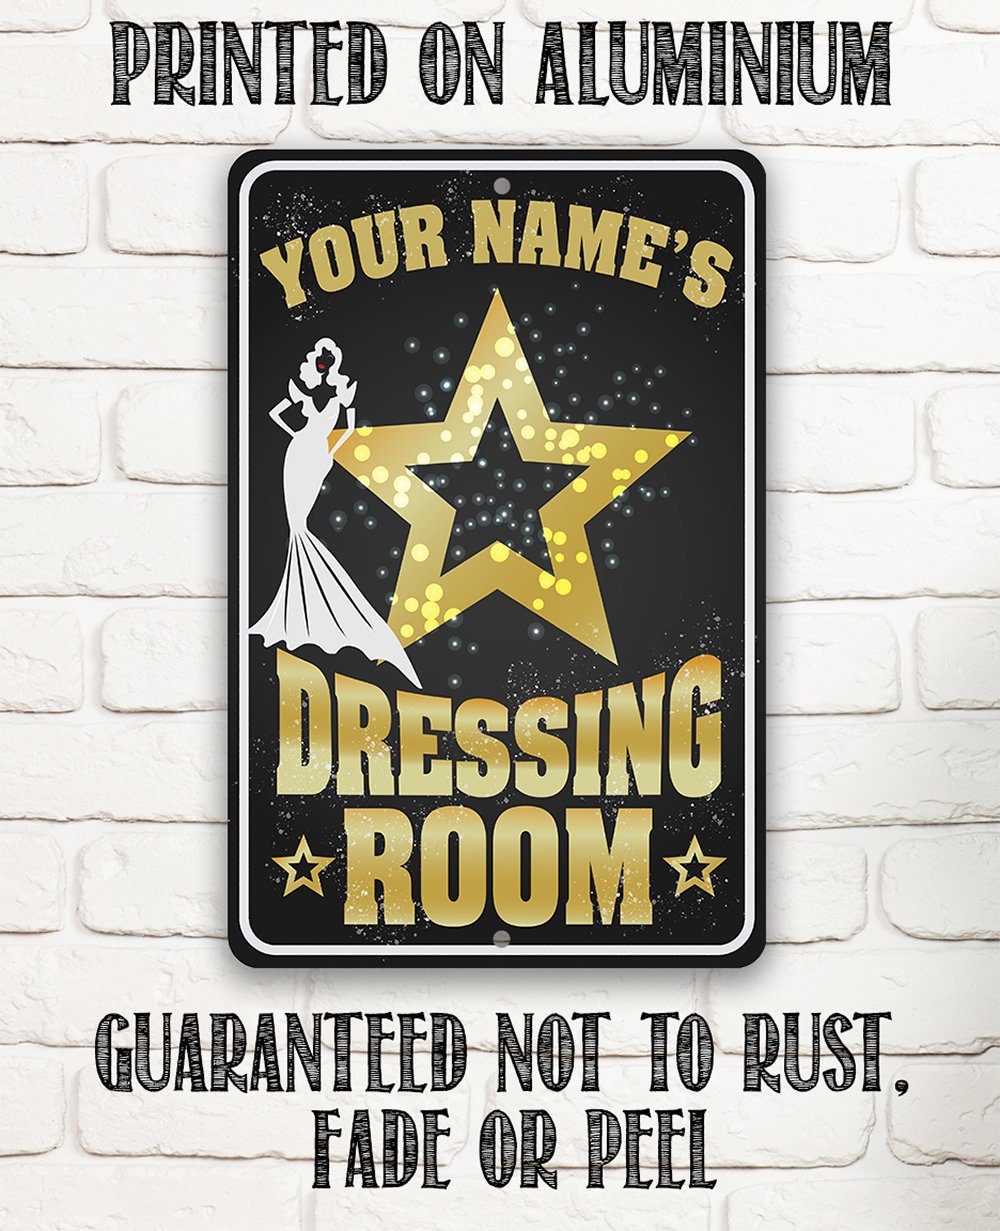 Personalized - Dressing Room - Metal Sign | Lone Star Art.